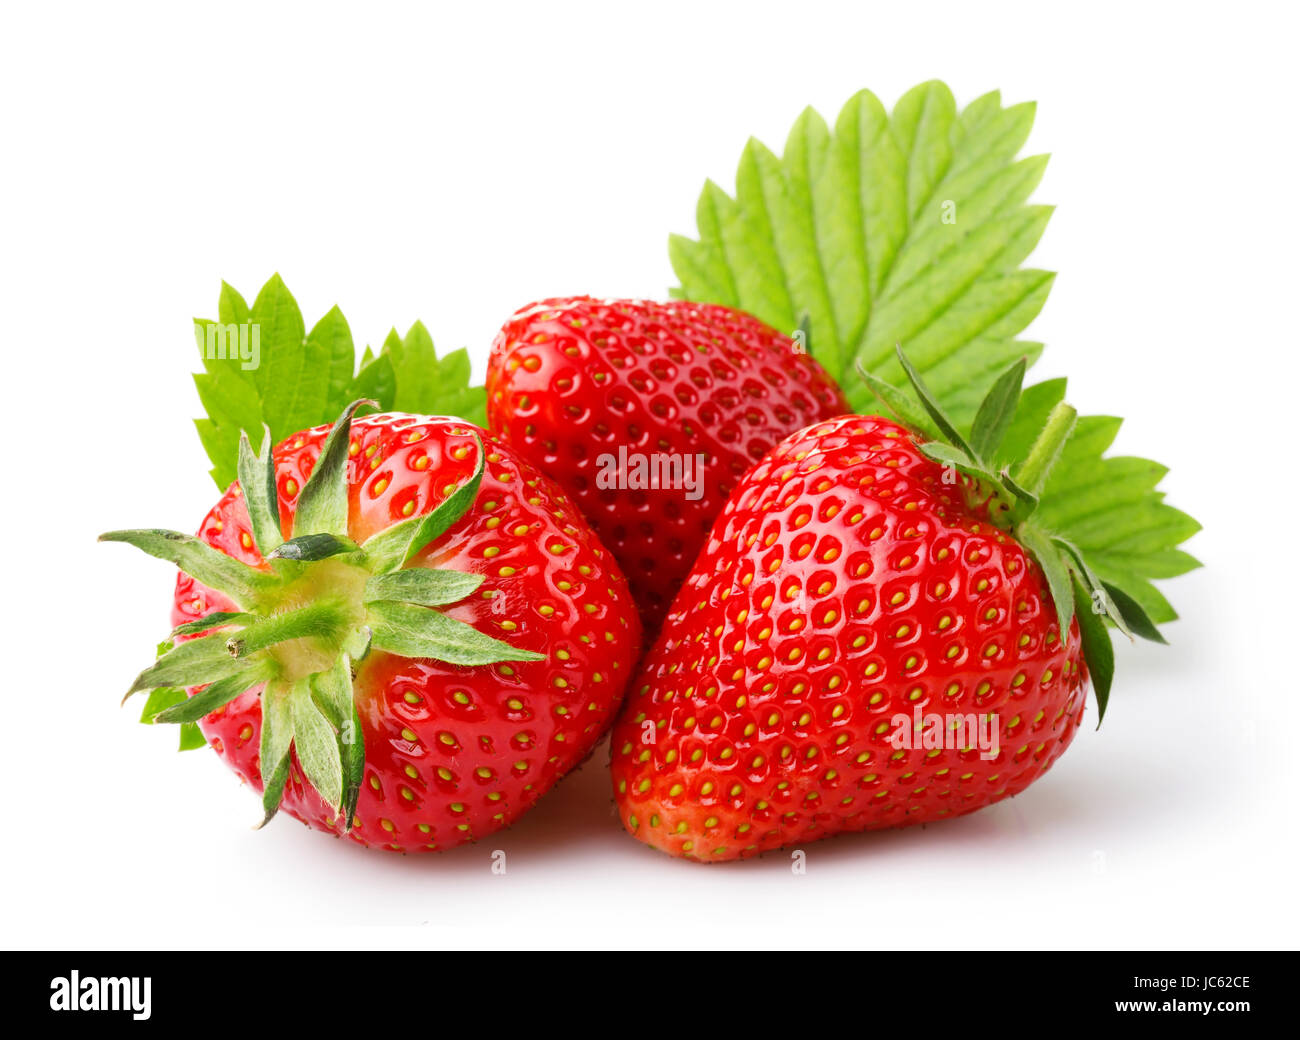 Ripe strawberries with leaves isolated on a white background Stock Photo